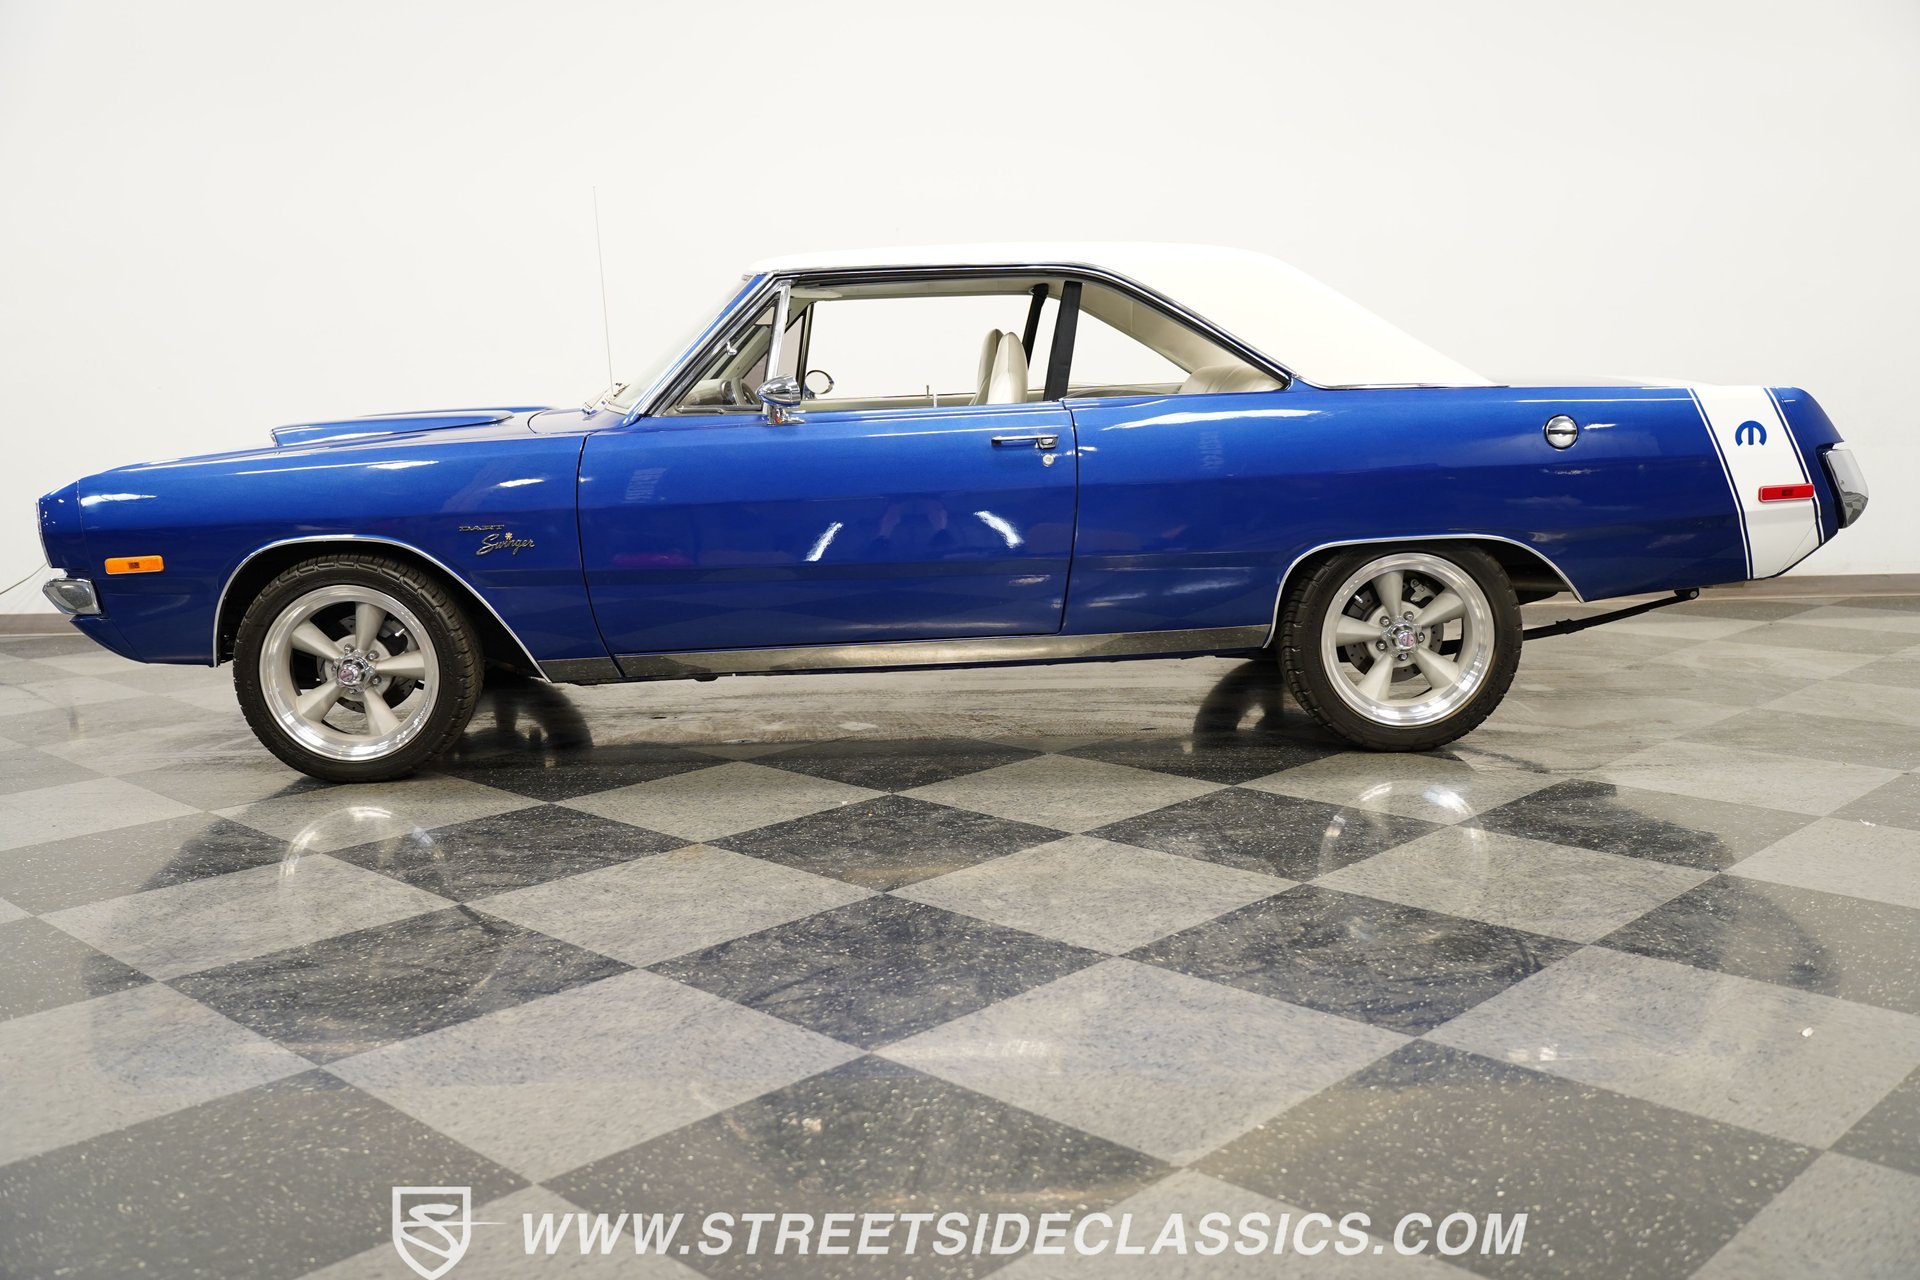 1972 Dodge Dart Classic Cars for Sale